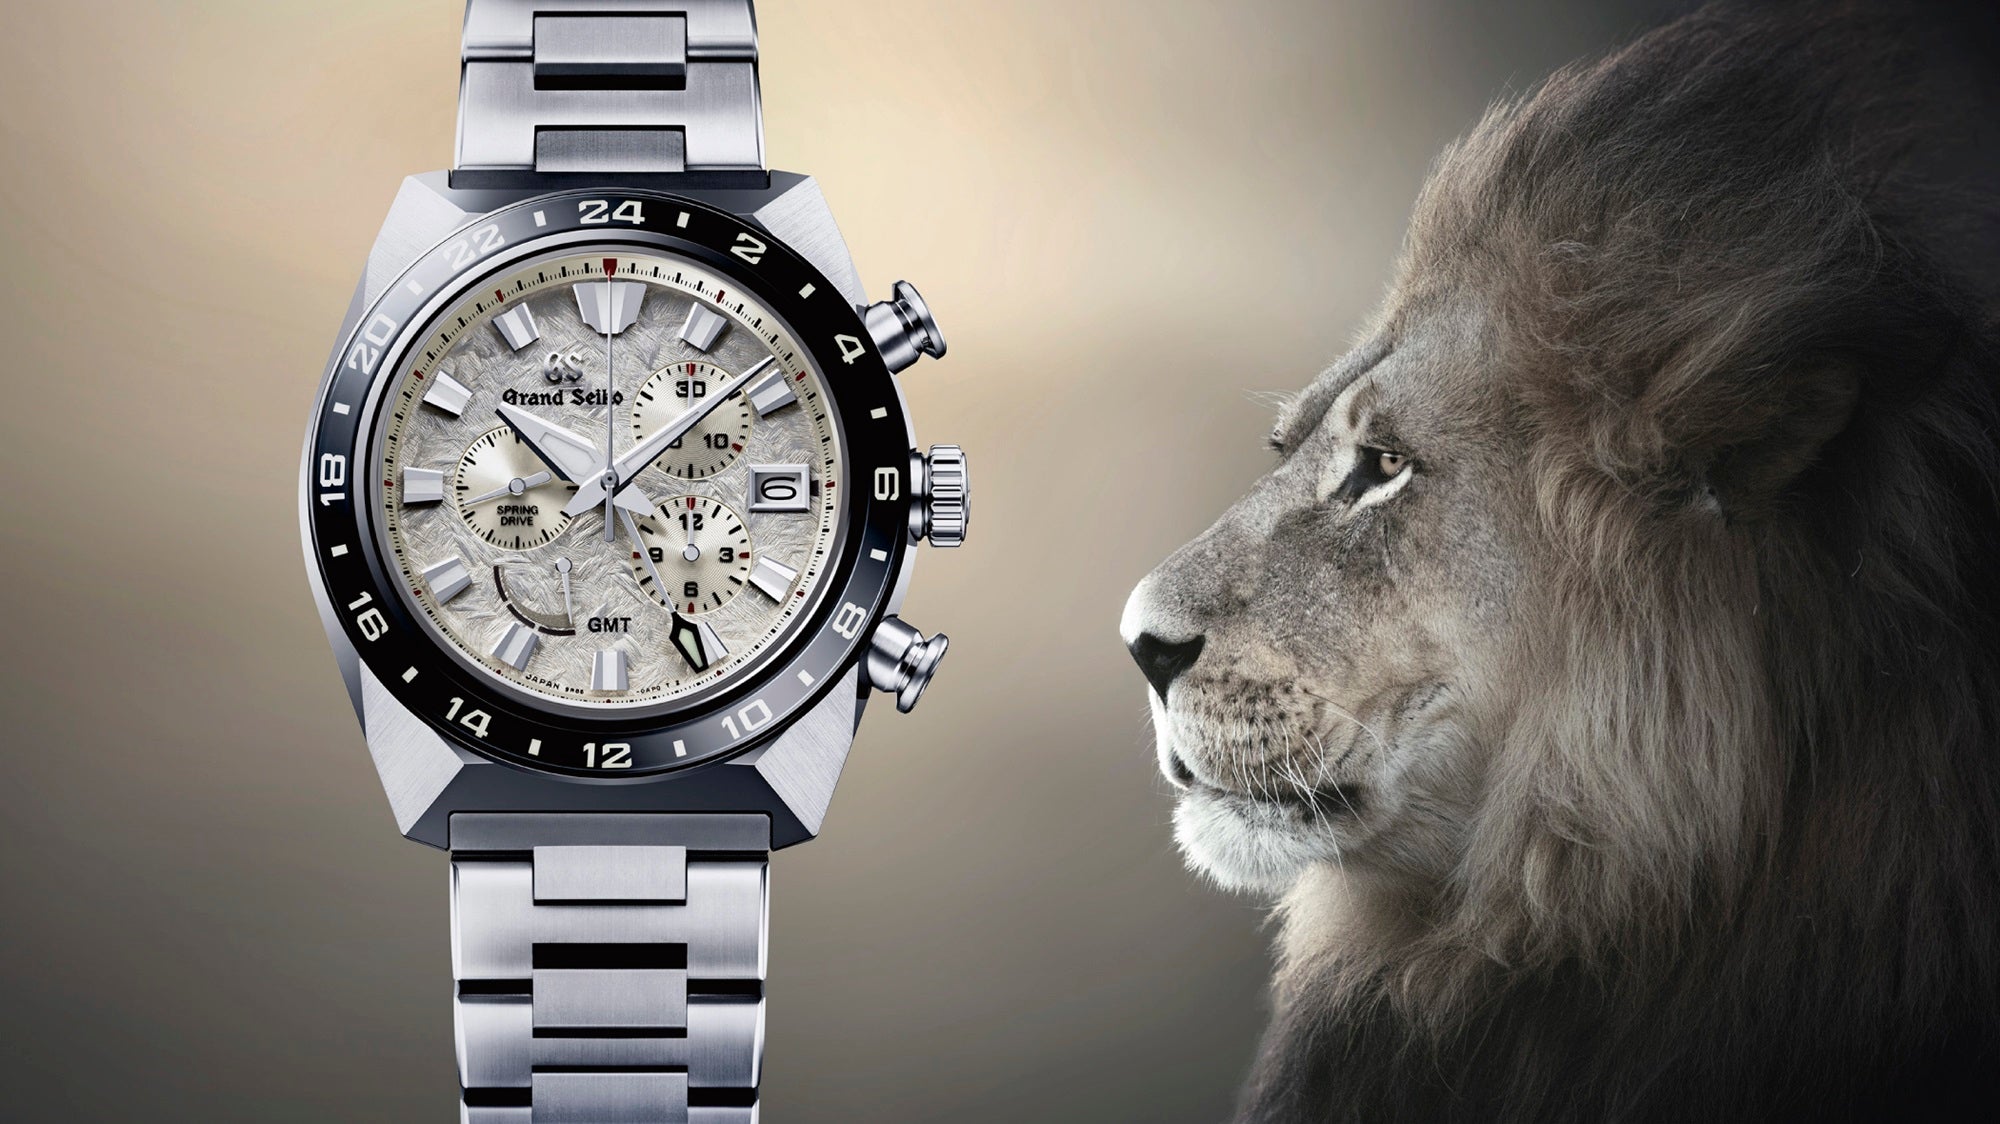 A new chronograph inspired by the Grand Seiko lion joins the main Sport Collection